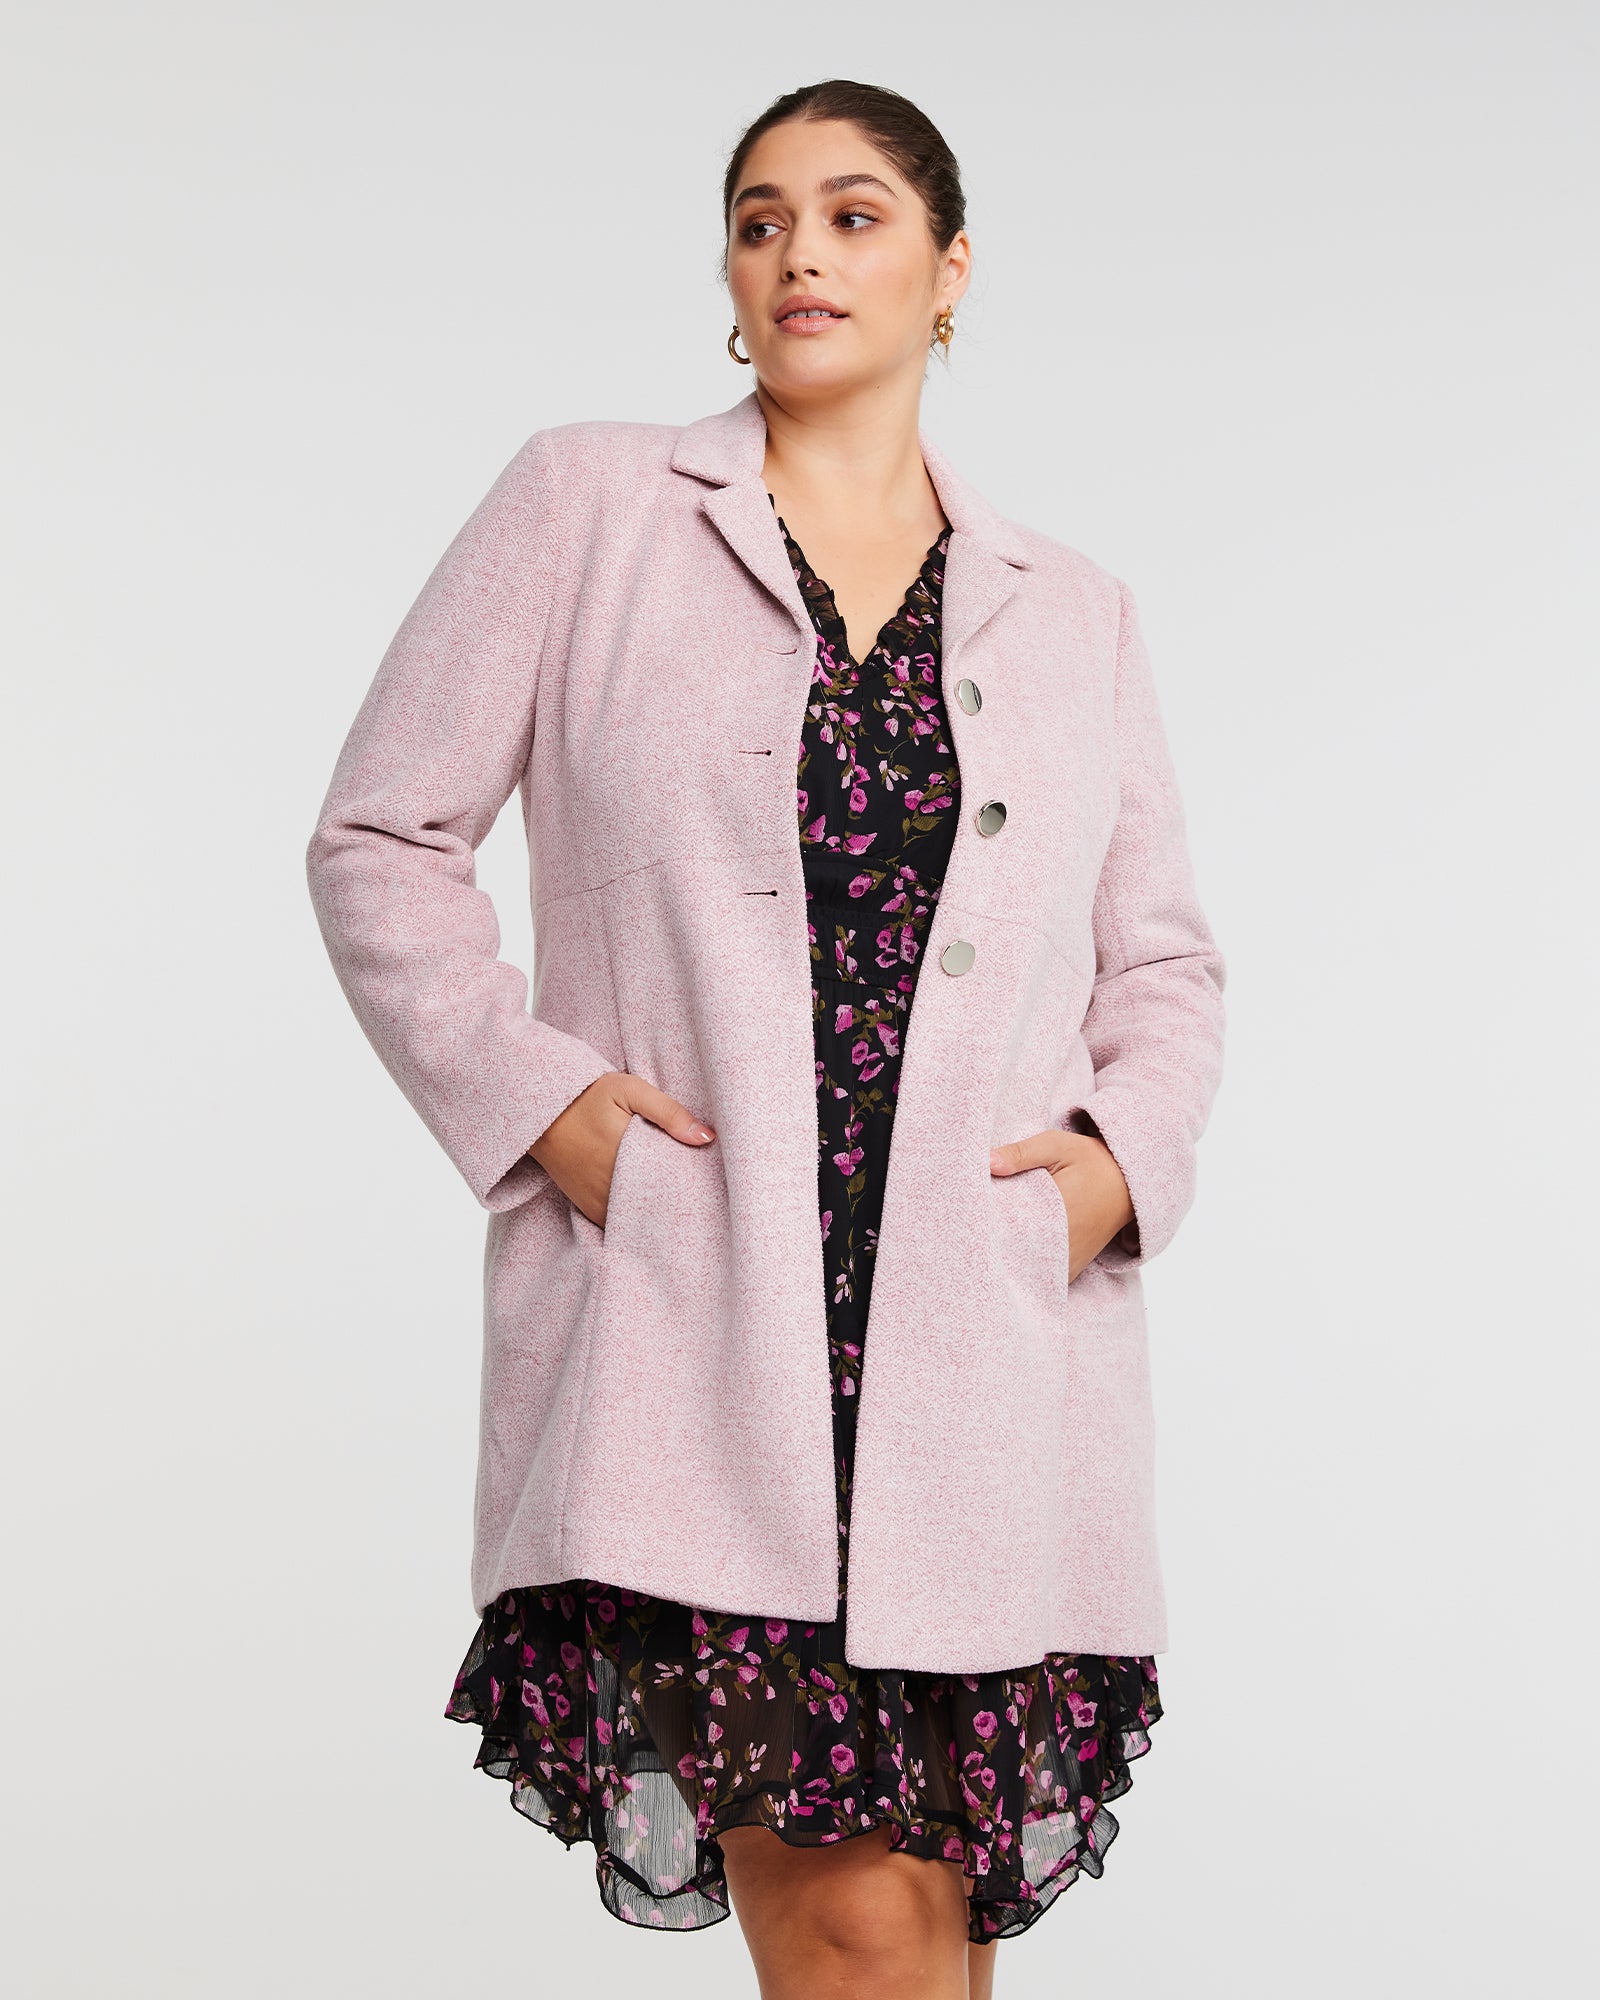 The model is wearing a Dusty Pink Collared Floater Coat by Estelle and floral dress.